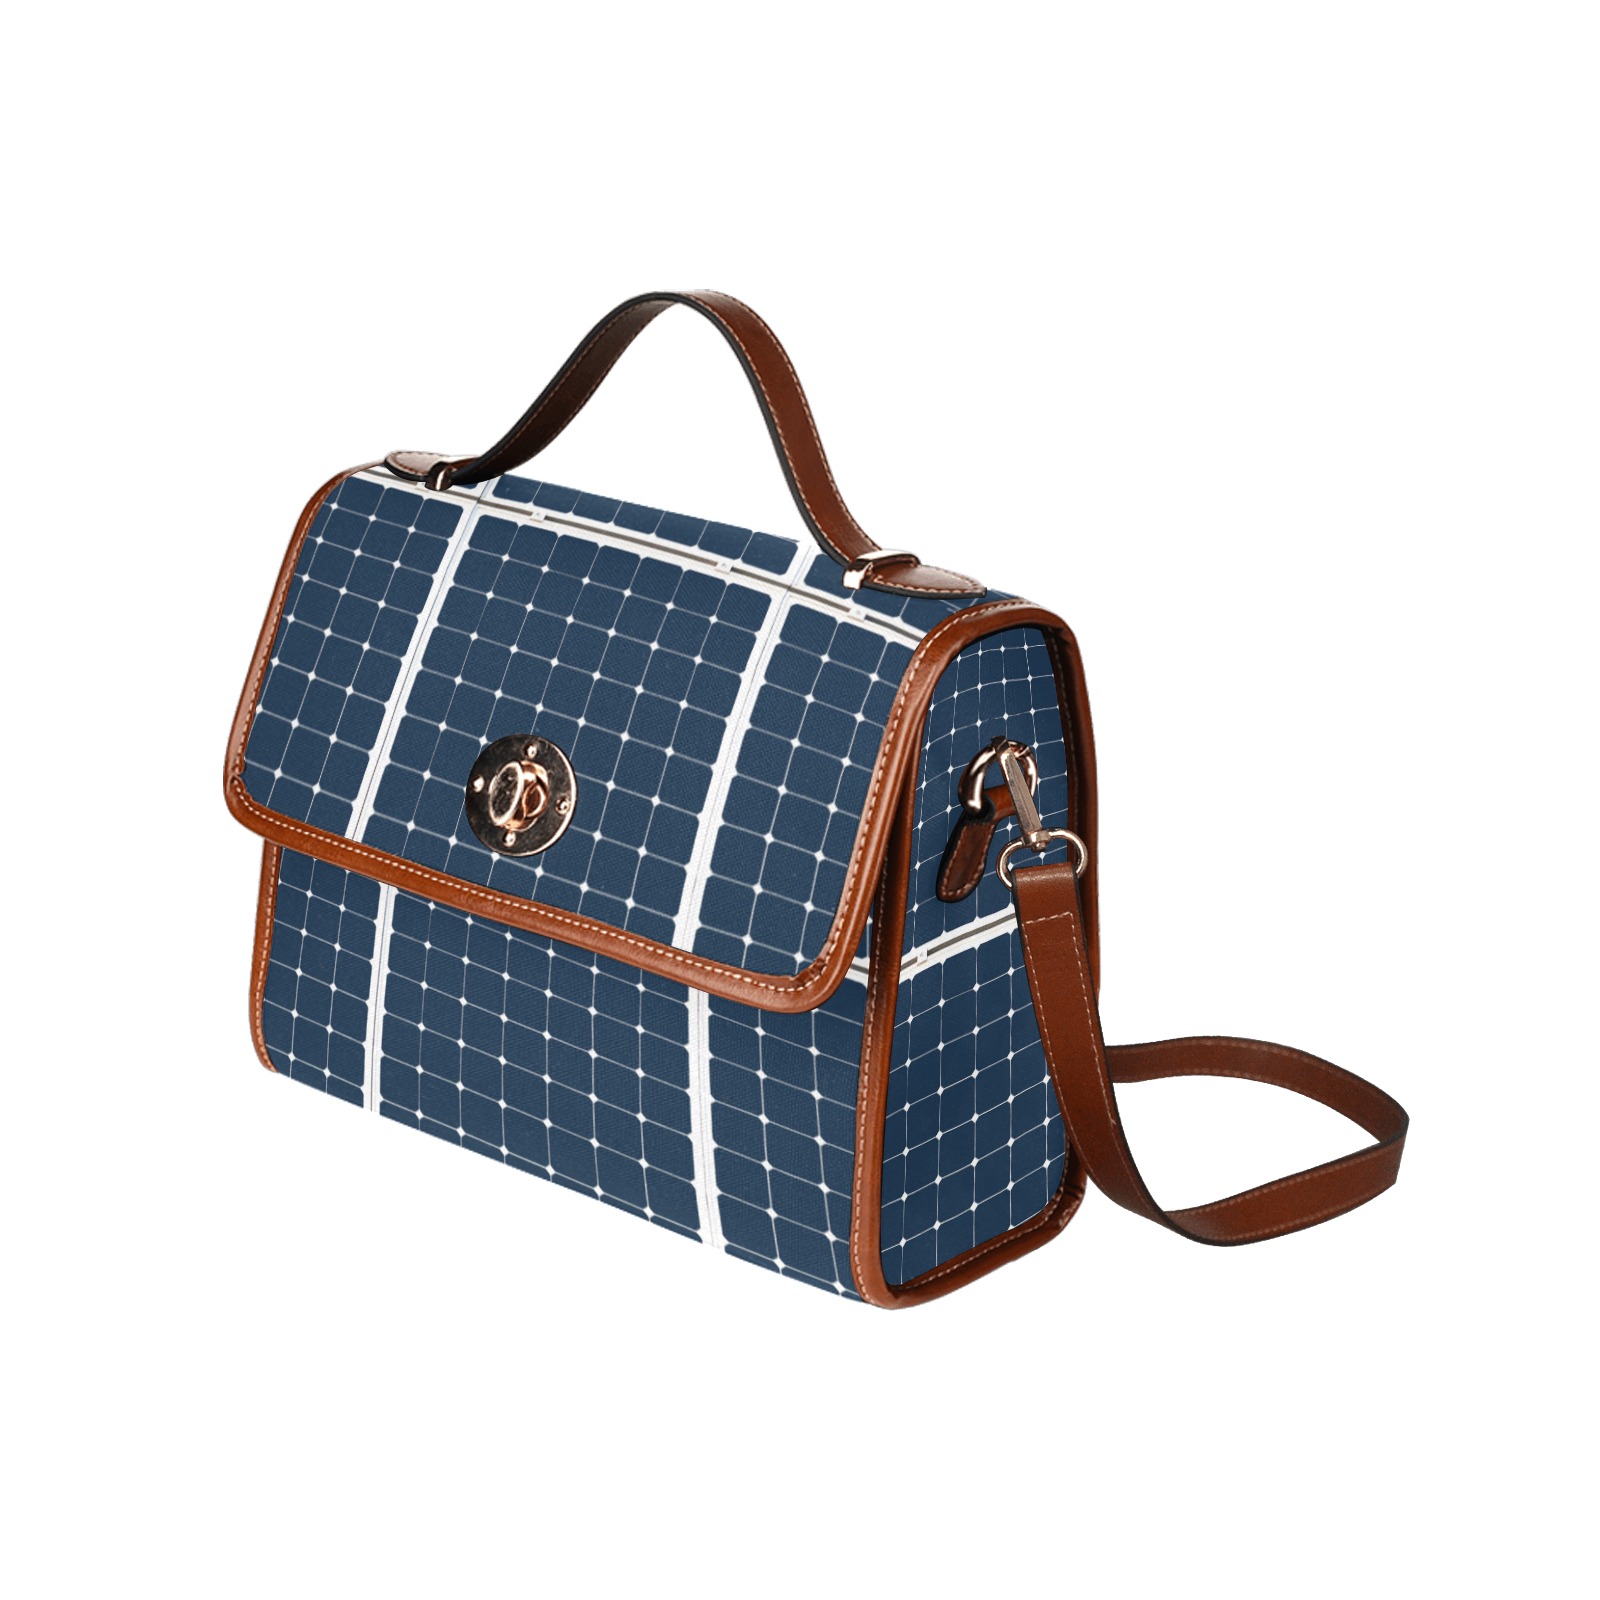 Solar Technology Power Panel Image Cell Energy Waterproof Canvas Bag-Brown (All Over Print) (Model 1641)